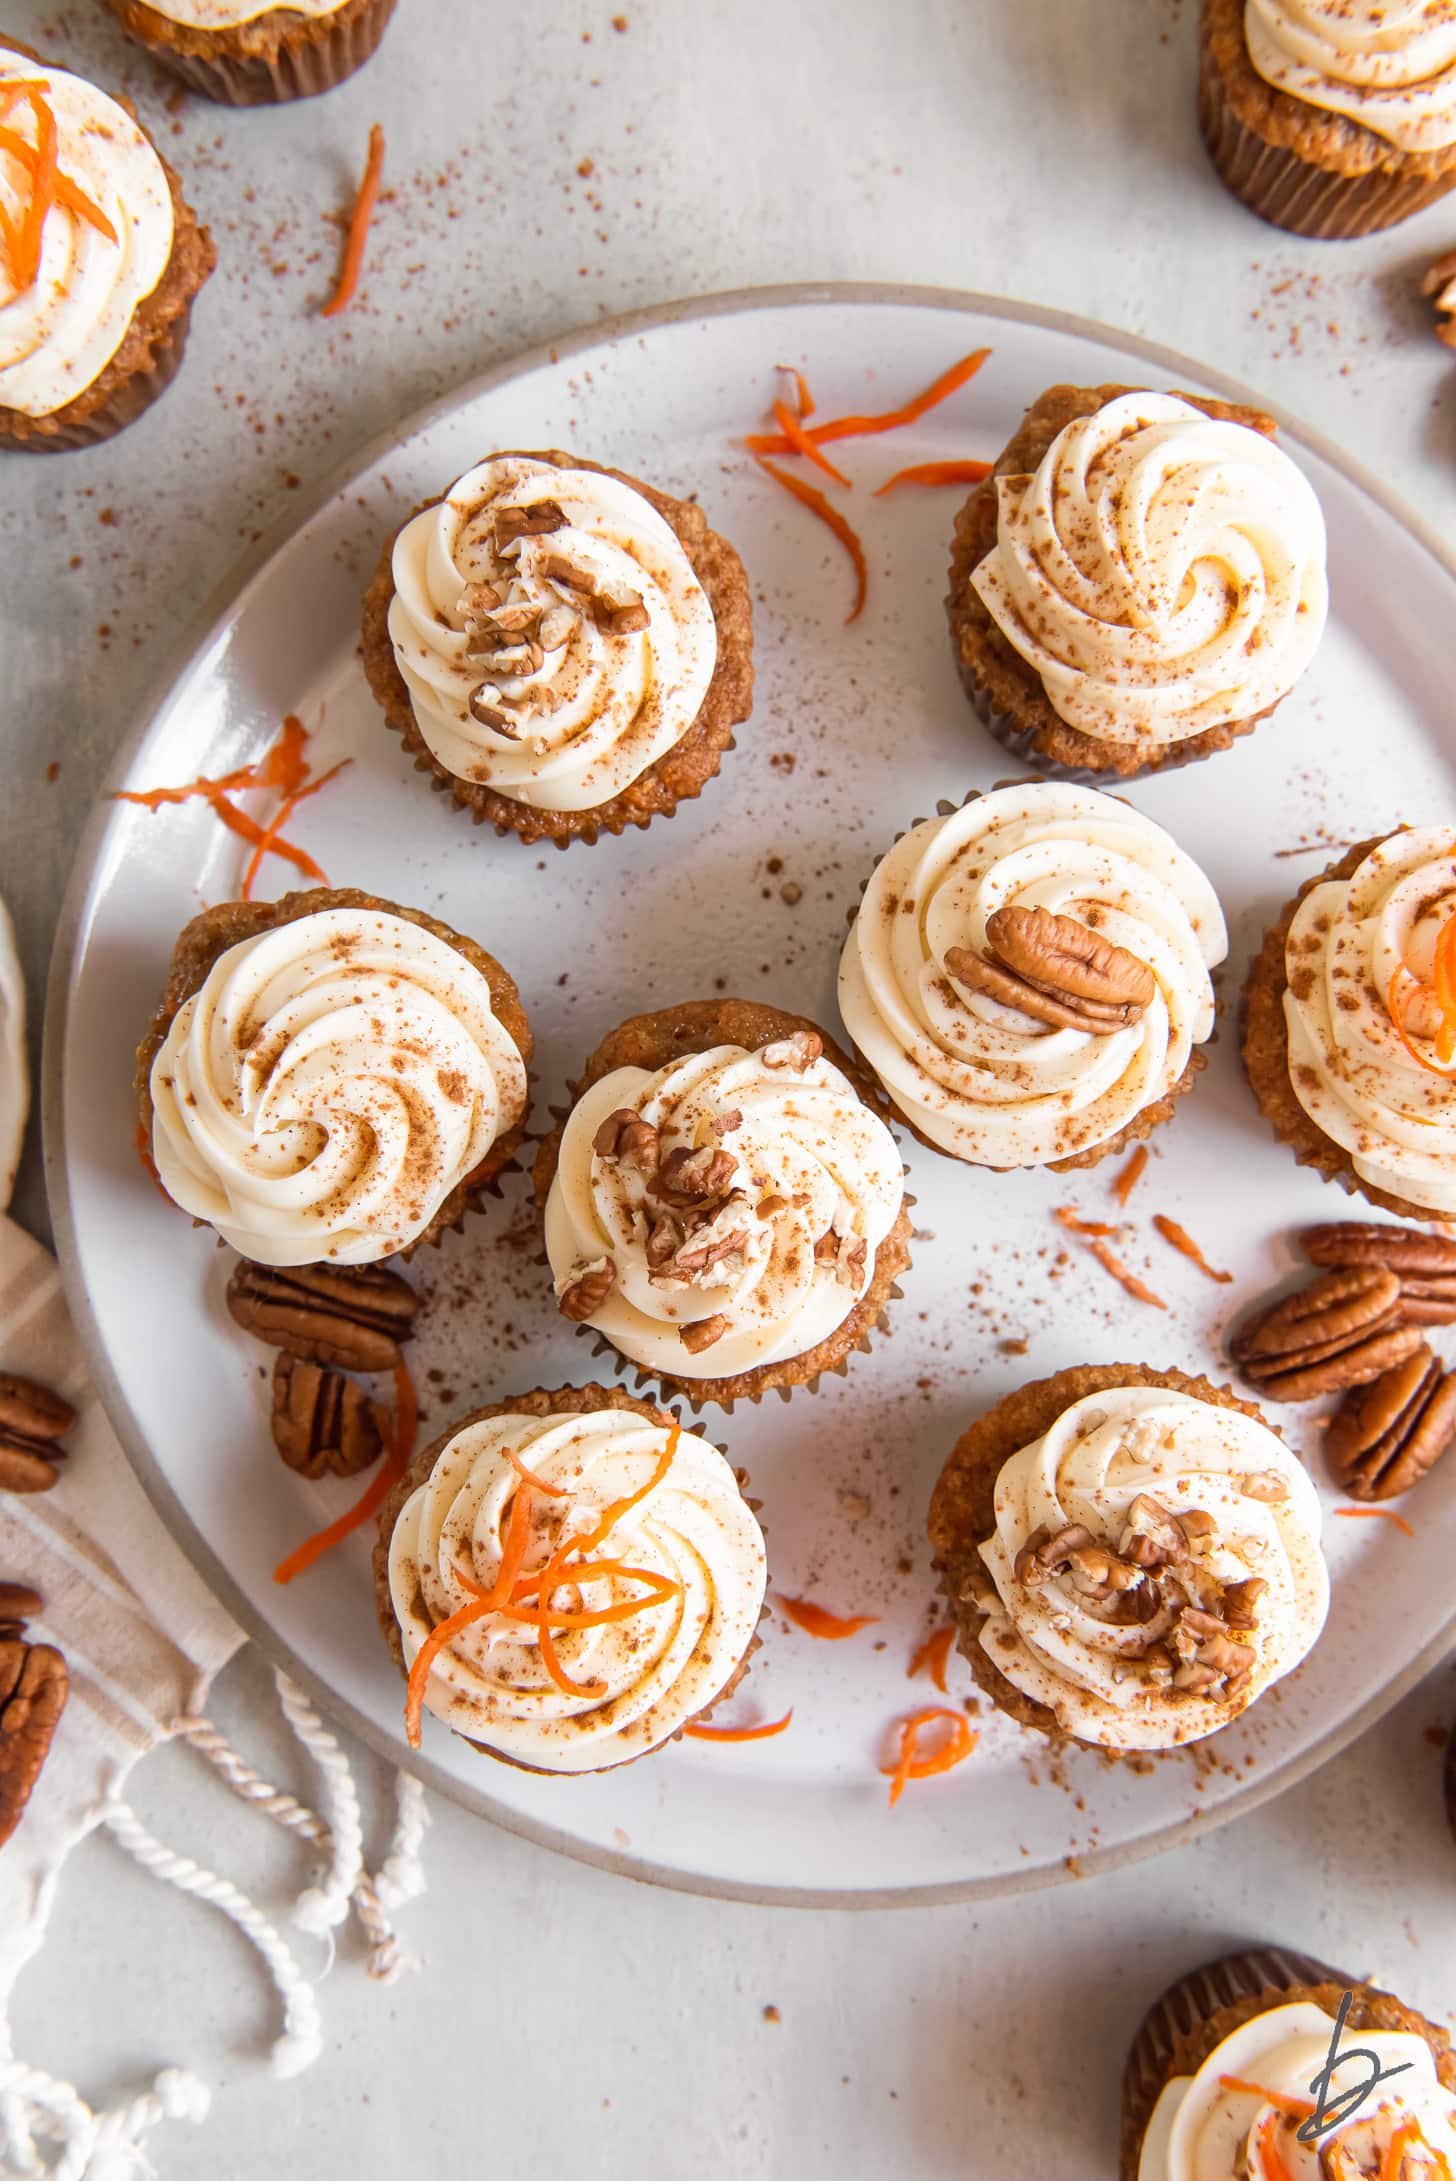 shredded carrot, chopped nuts and cream cheese frosting on top of cupcakes on a plate.